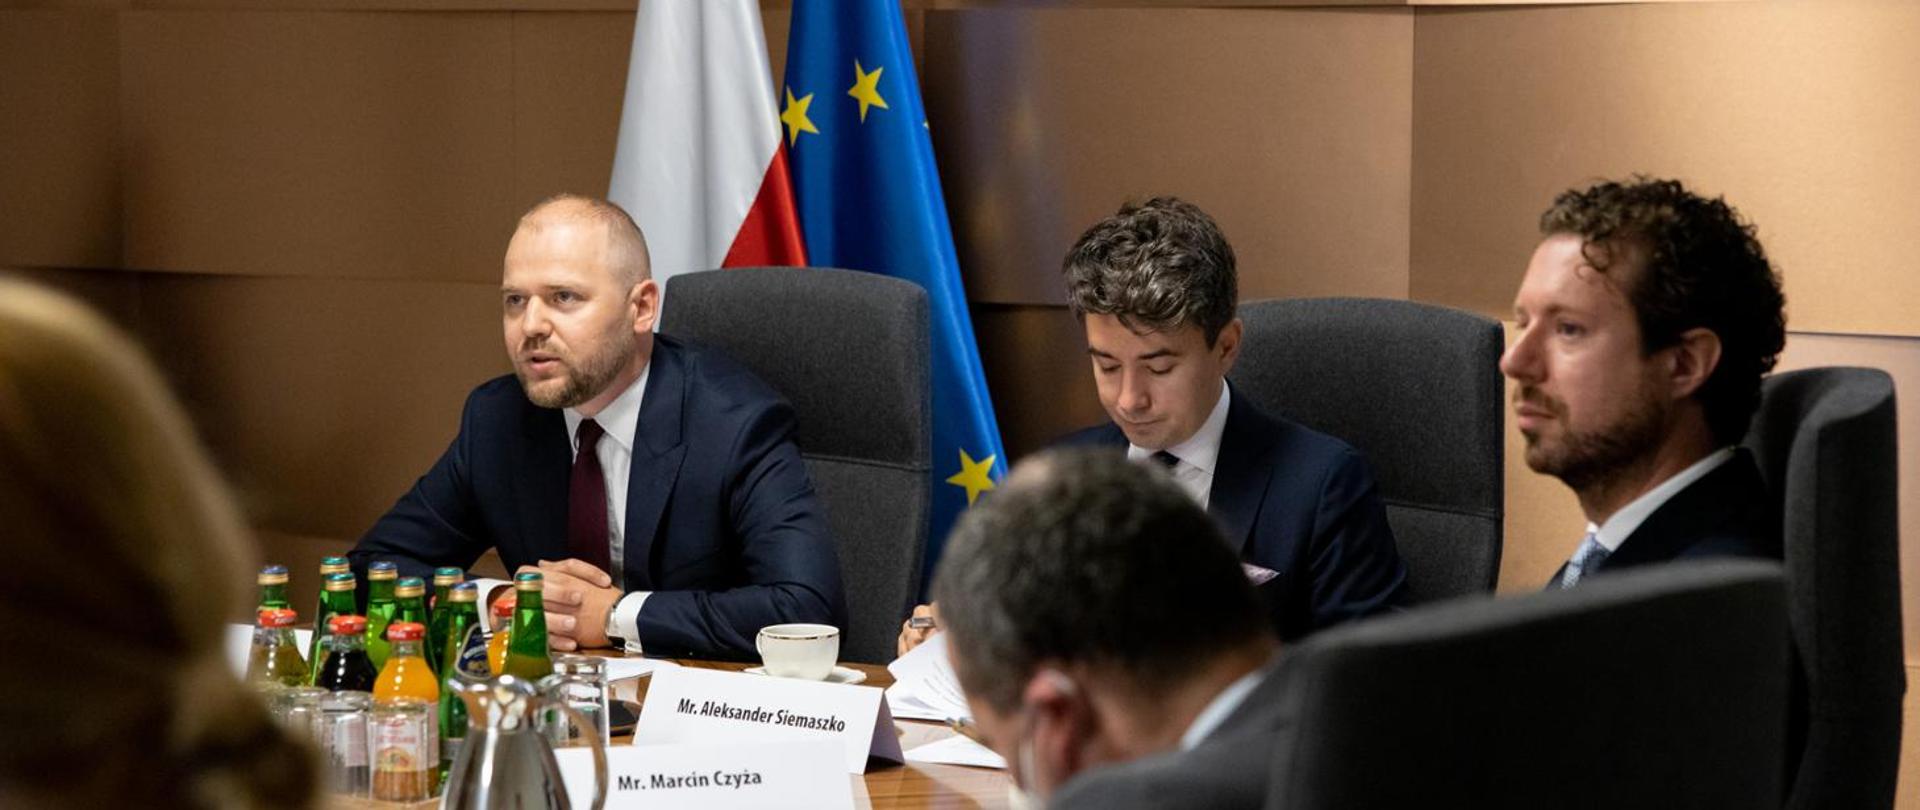 Deputy Minister Krzysztof Mazur is sitting at the table against the background of Polish and EU flags. Next to the Polish delegation.